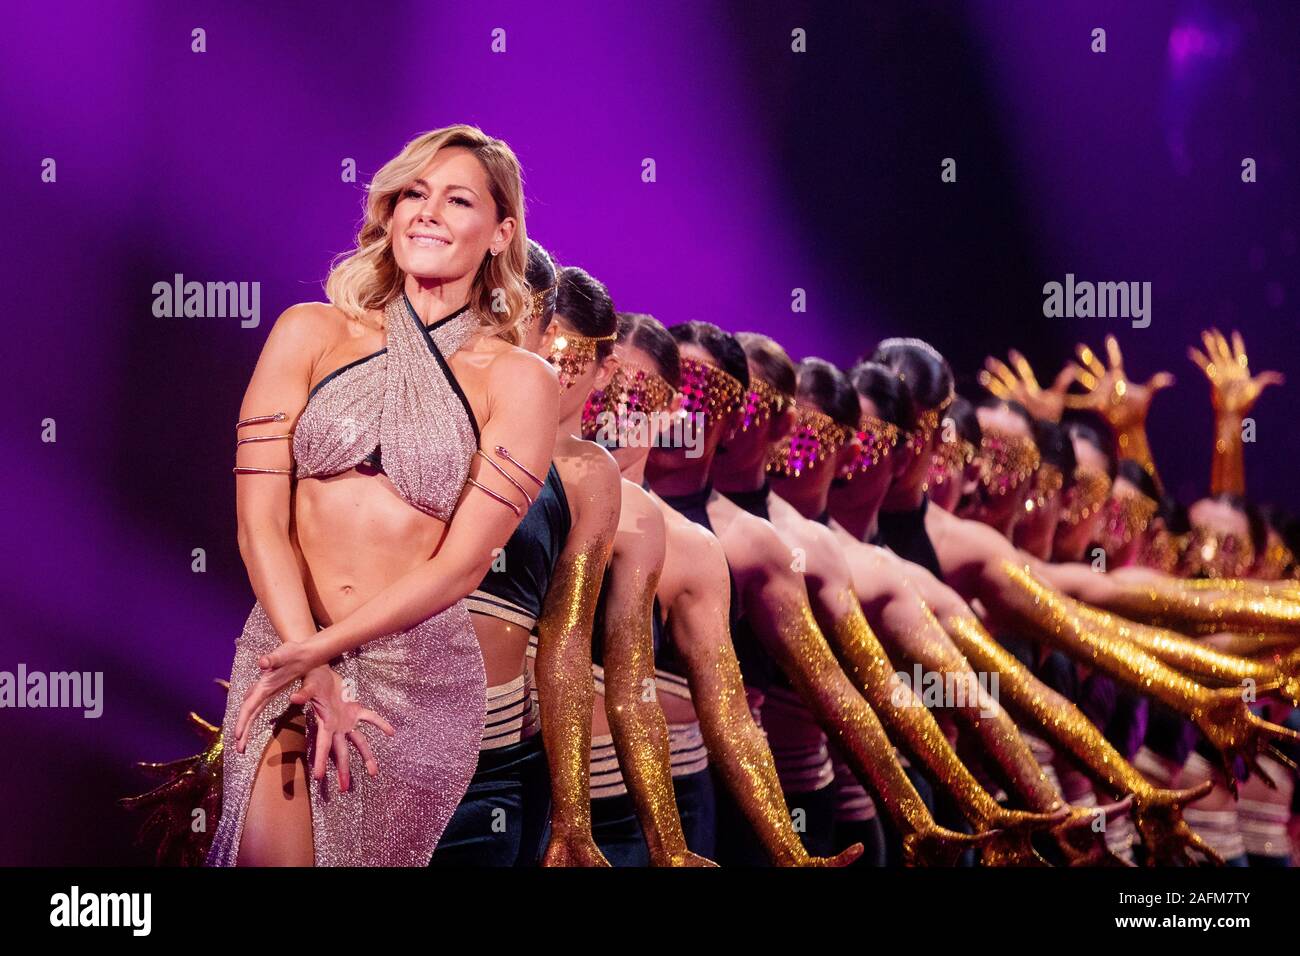 Duesseldorf, Germany. 14th Dec, 2019. Helene Fischer will perform during  the recording of the Helene Fischer Show in Hall 6. On 25.12.2019 at 20.15  the Helene Fischer Show will be broadcasted on